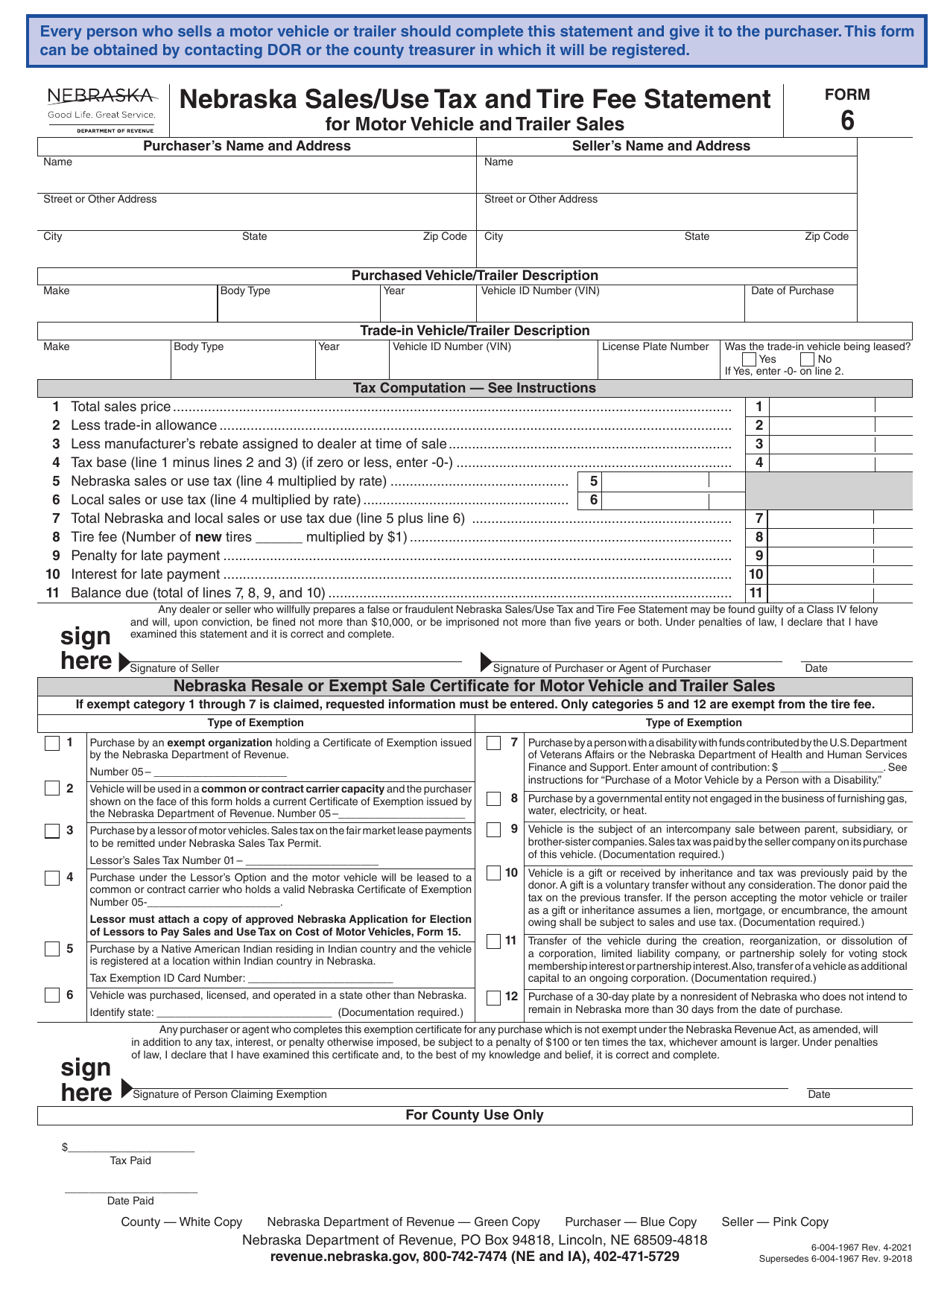 Form 6 Nebraska Sales / Use Tax and Tire Fee Statement for Motor Vehicle and Trailer Sales - Nebraska, Page 1